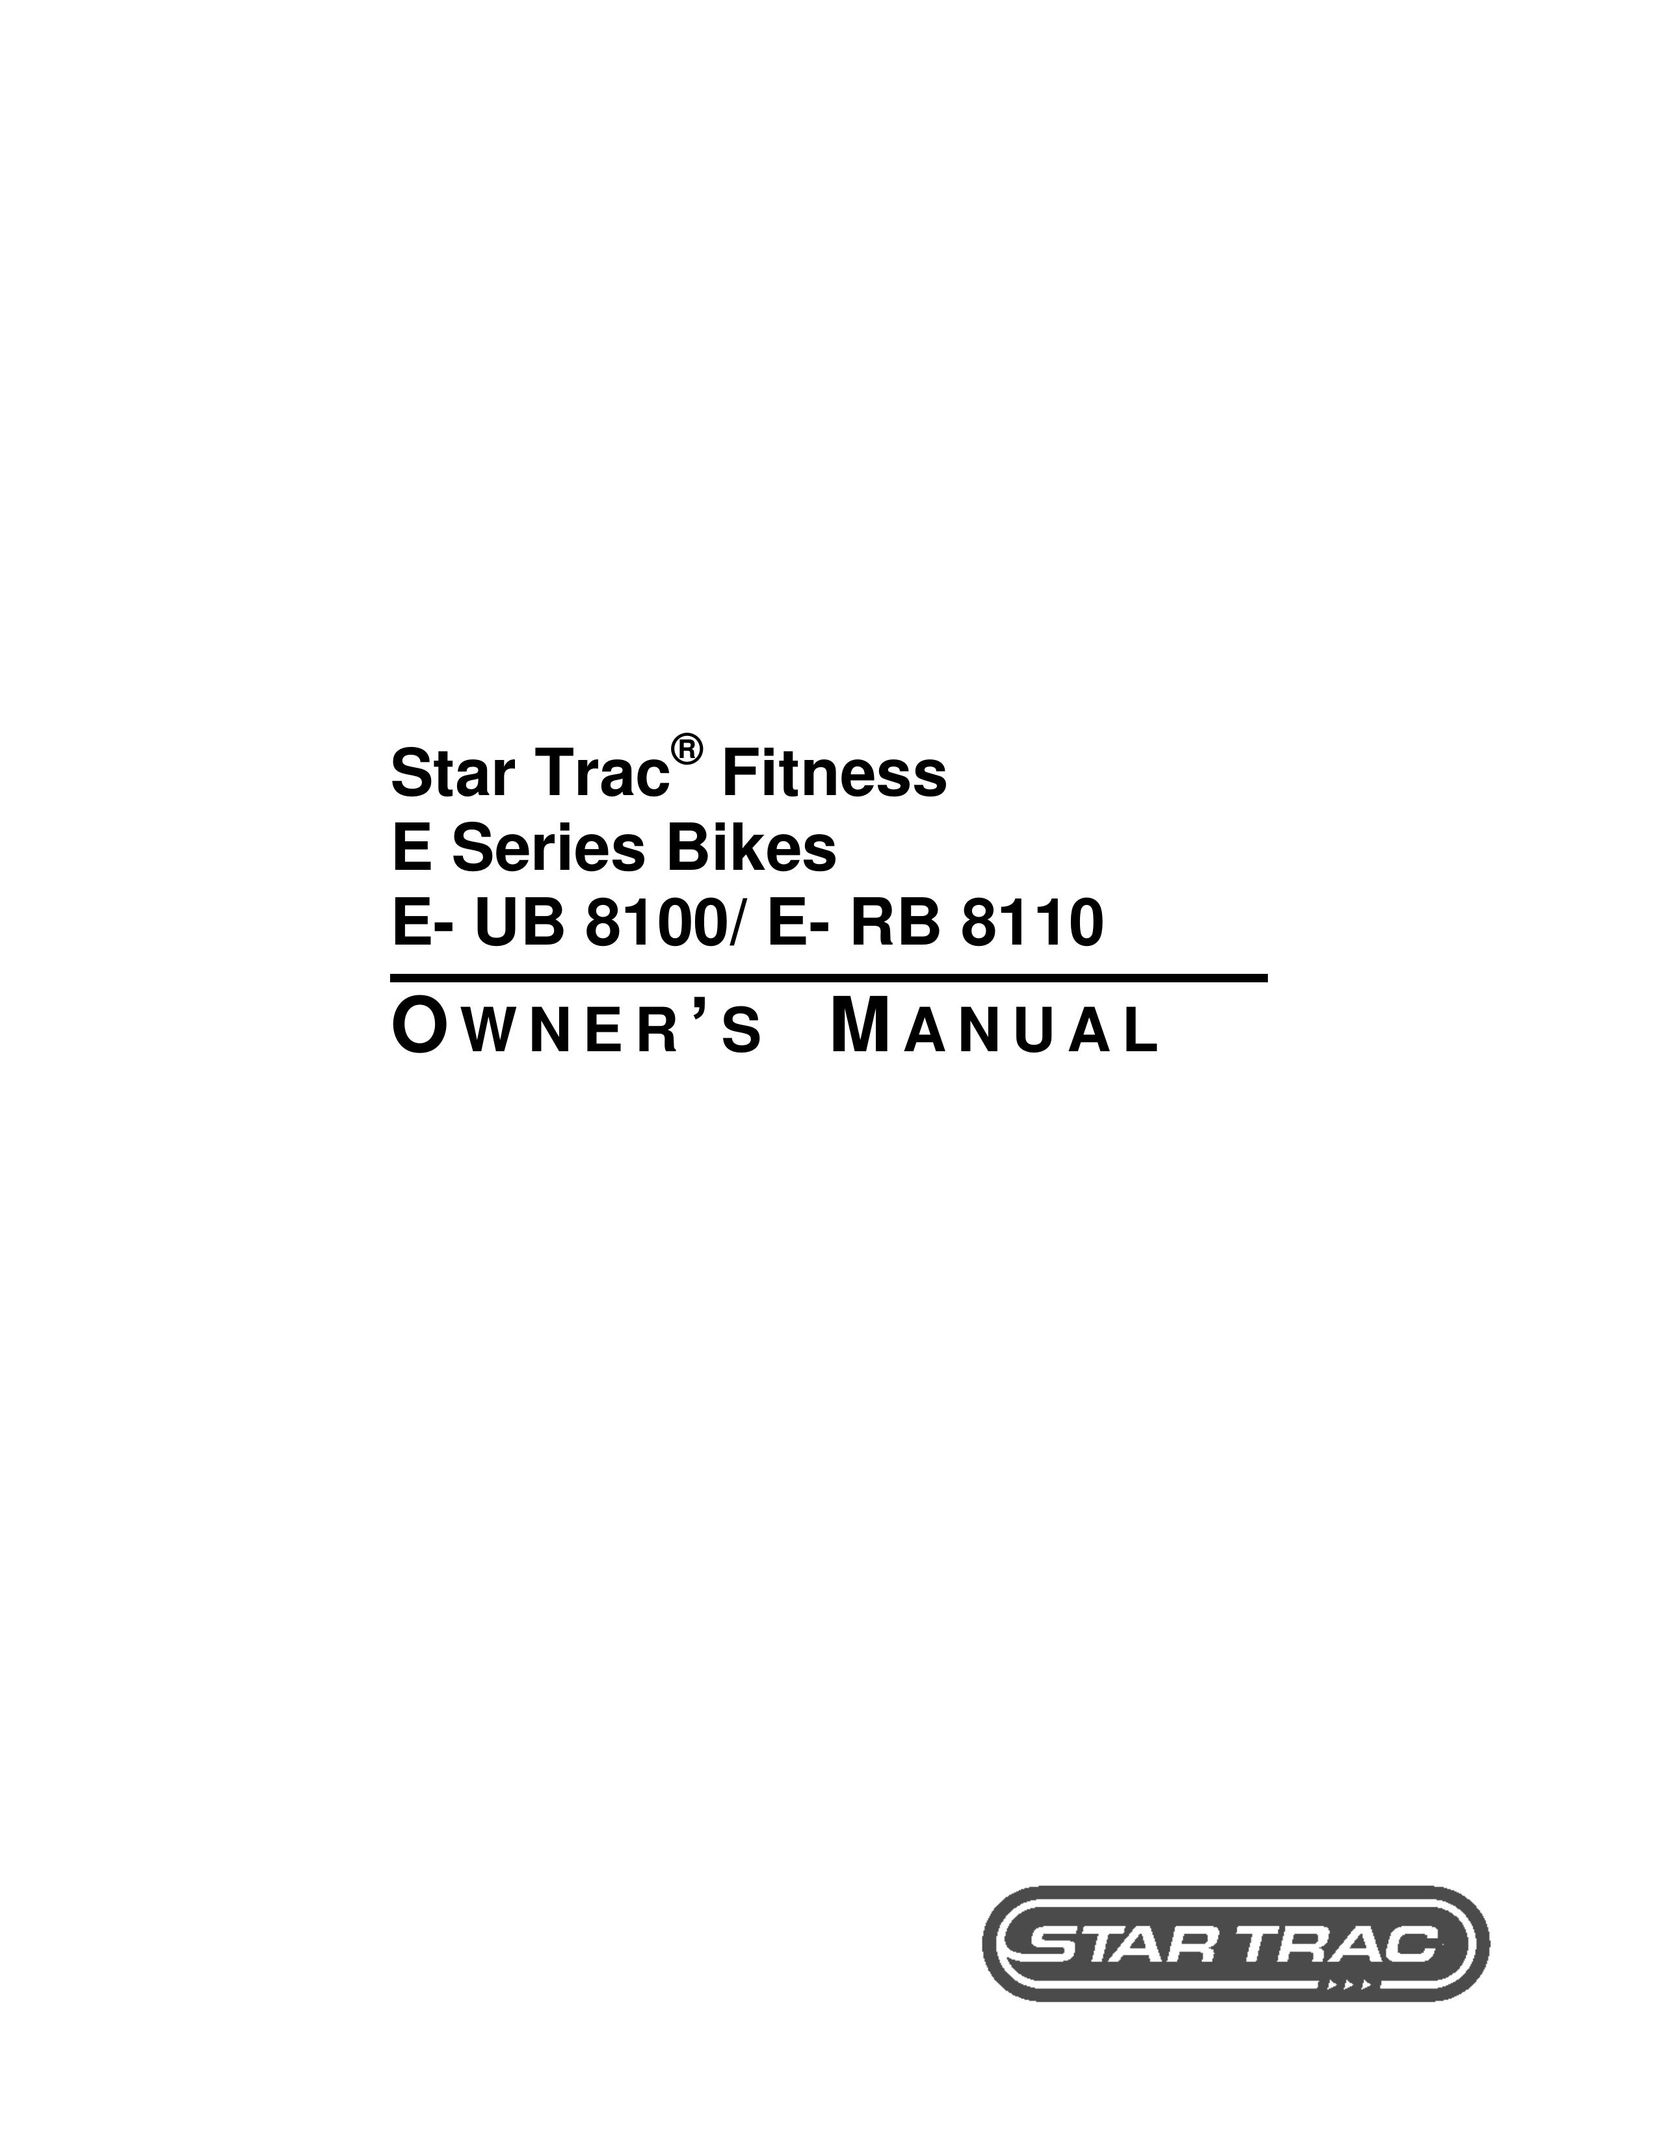 Star Trac E- UB 8100 Bicycle Accessories User Manual